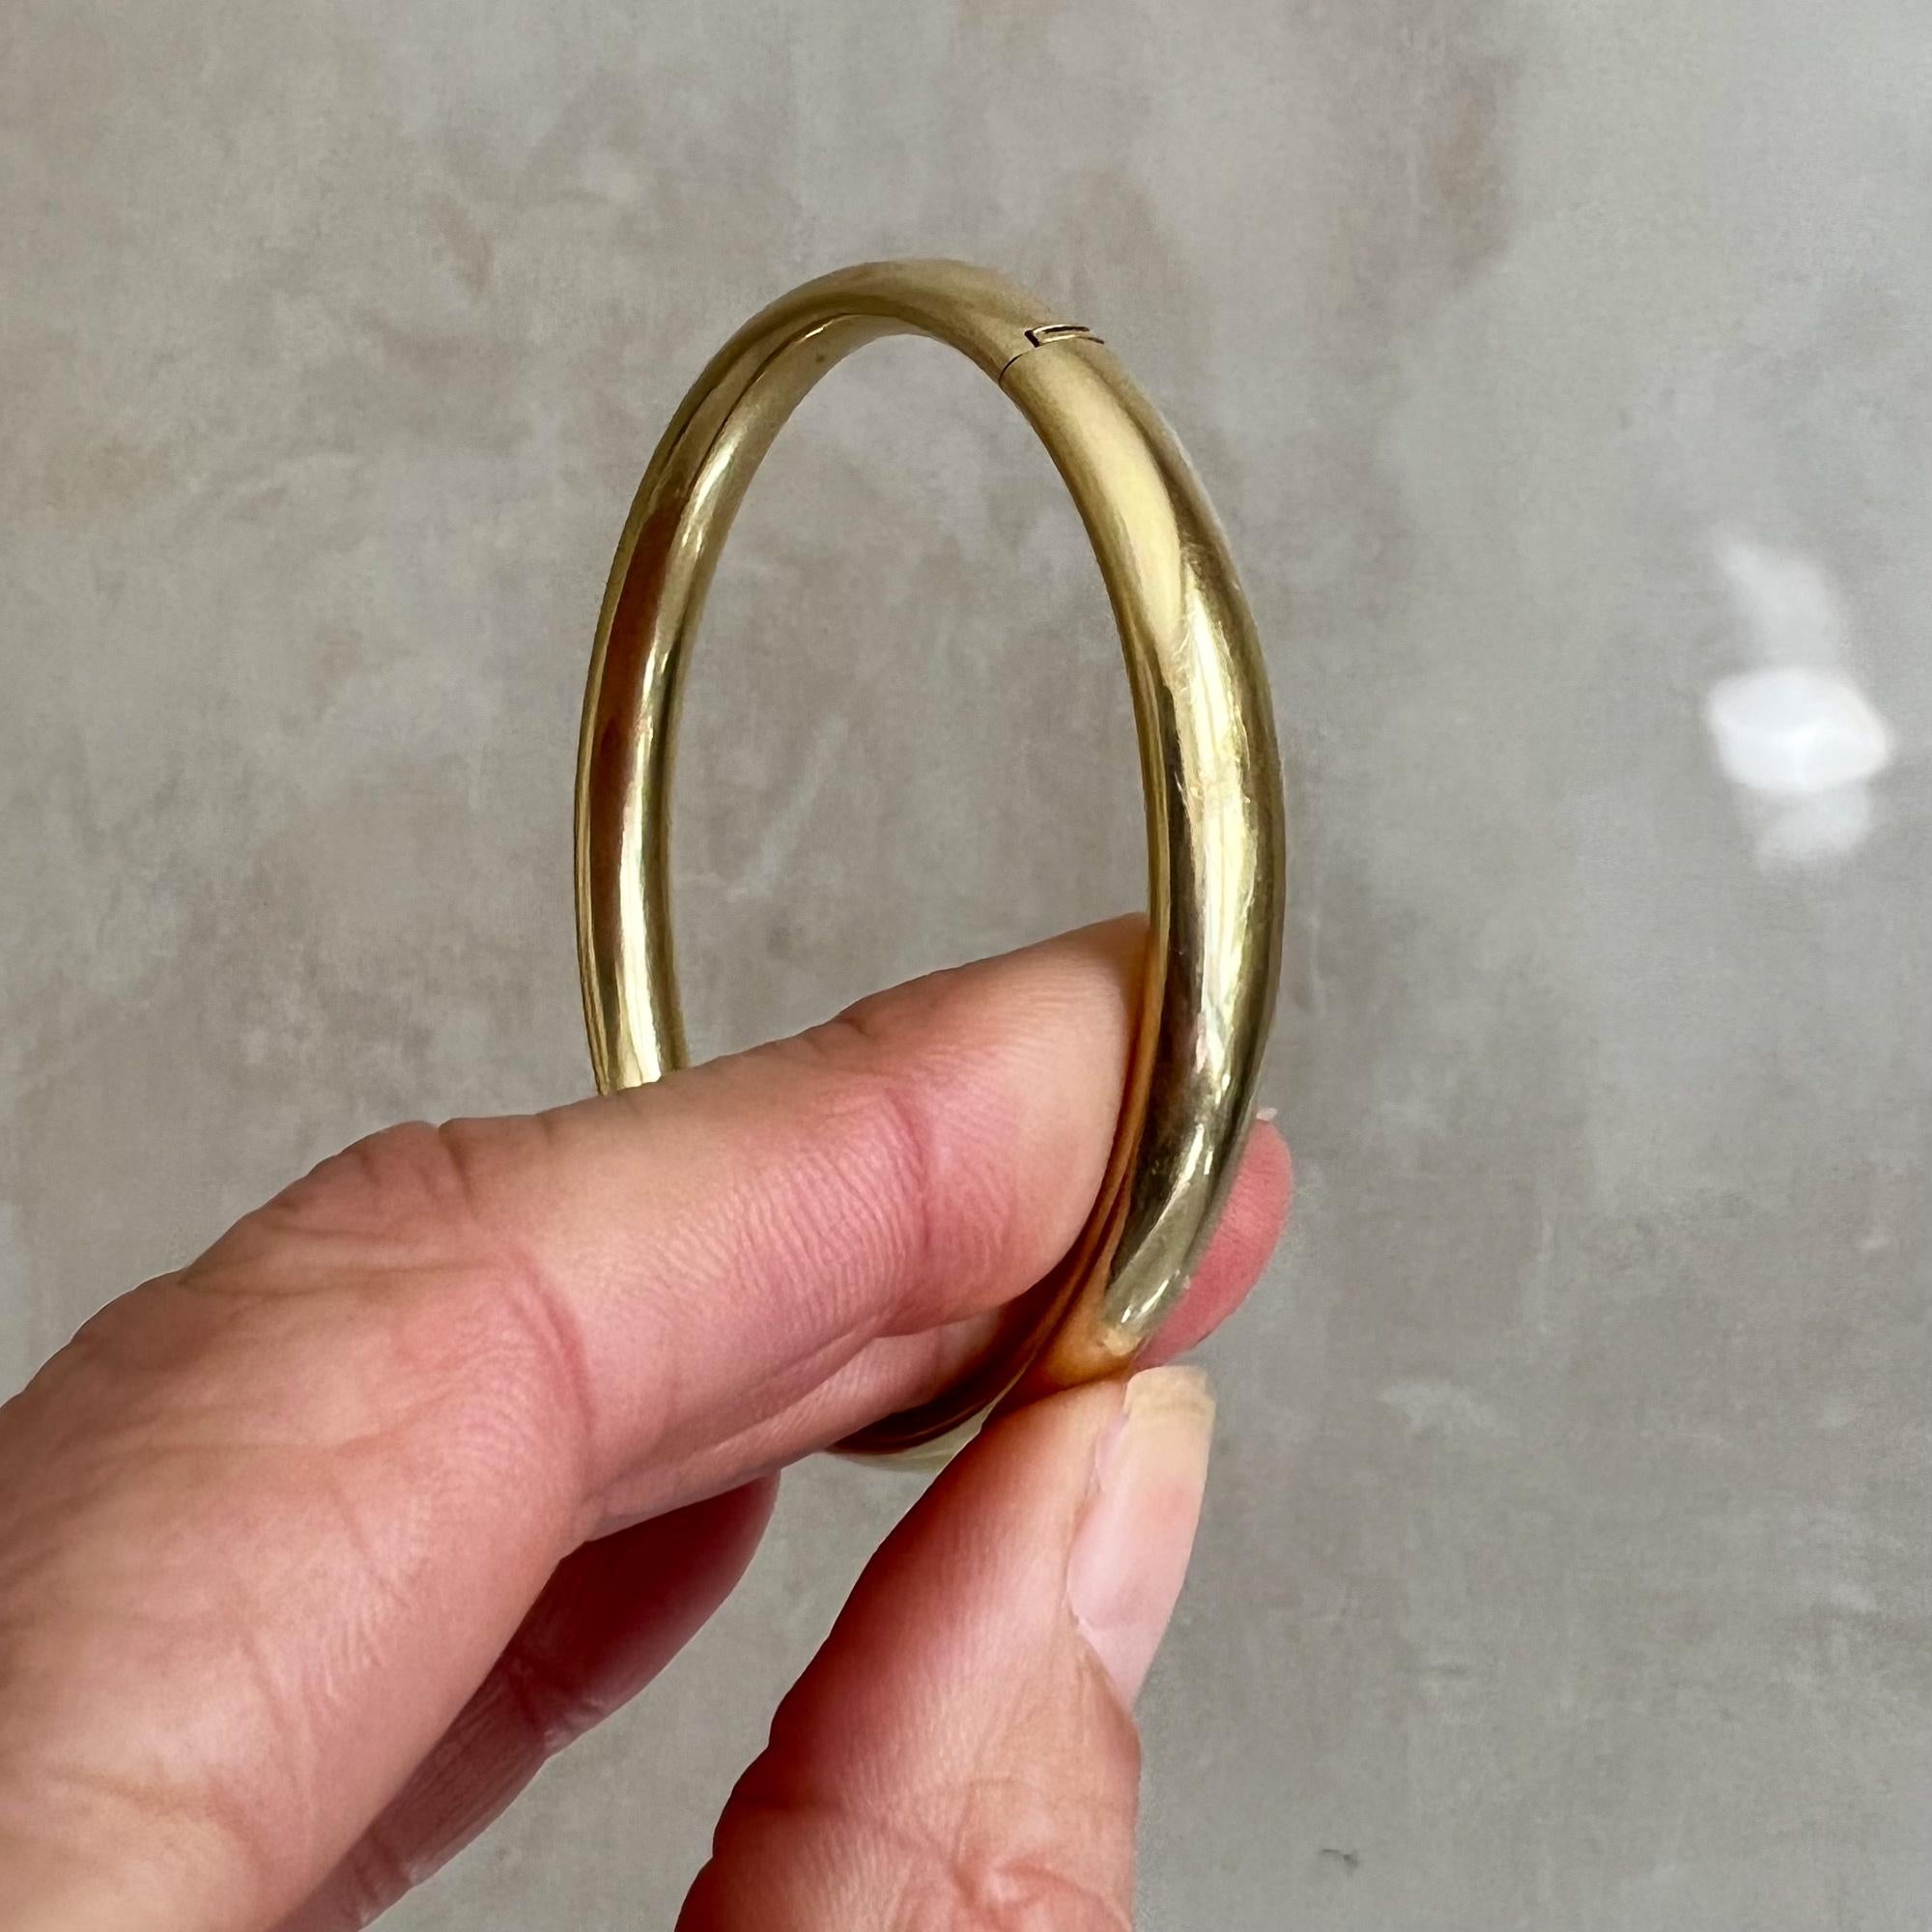 A beautiful vintage hinged bangle bracelet crafted in 14 karat yellow gold. The oval shaped bangle has a warm gold glow, is hinged and has a nice weight of 16.6 grams. The bracelet is versatile to wear and it is a real statement piece. The bangle